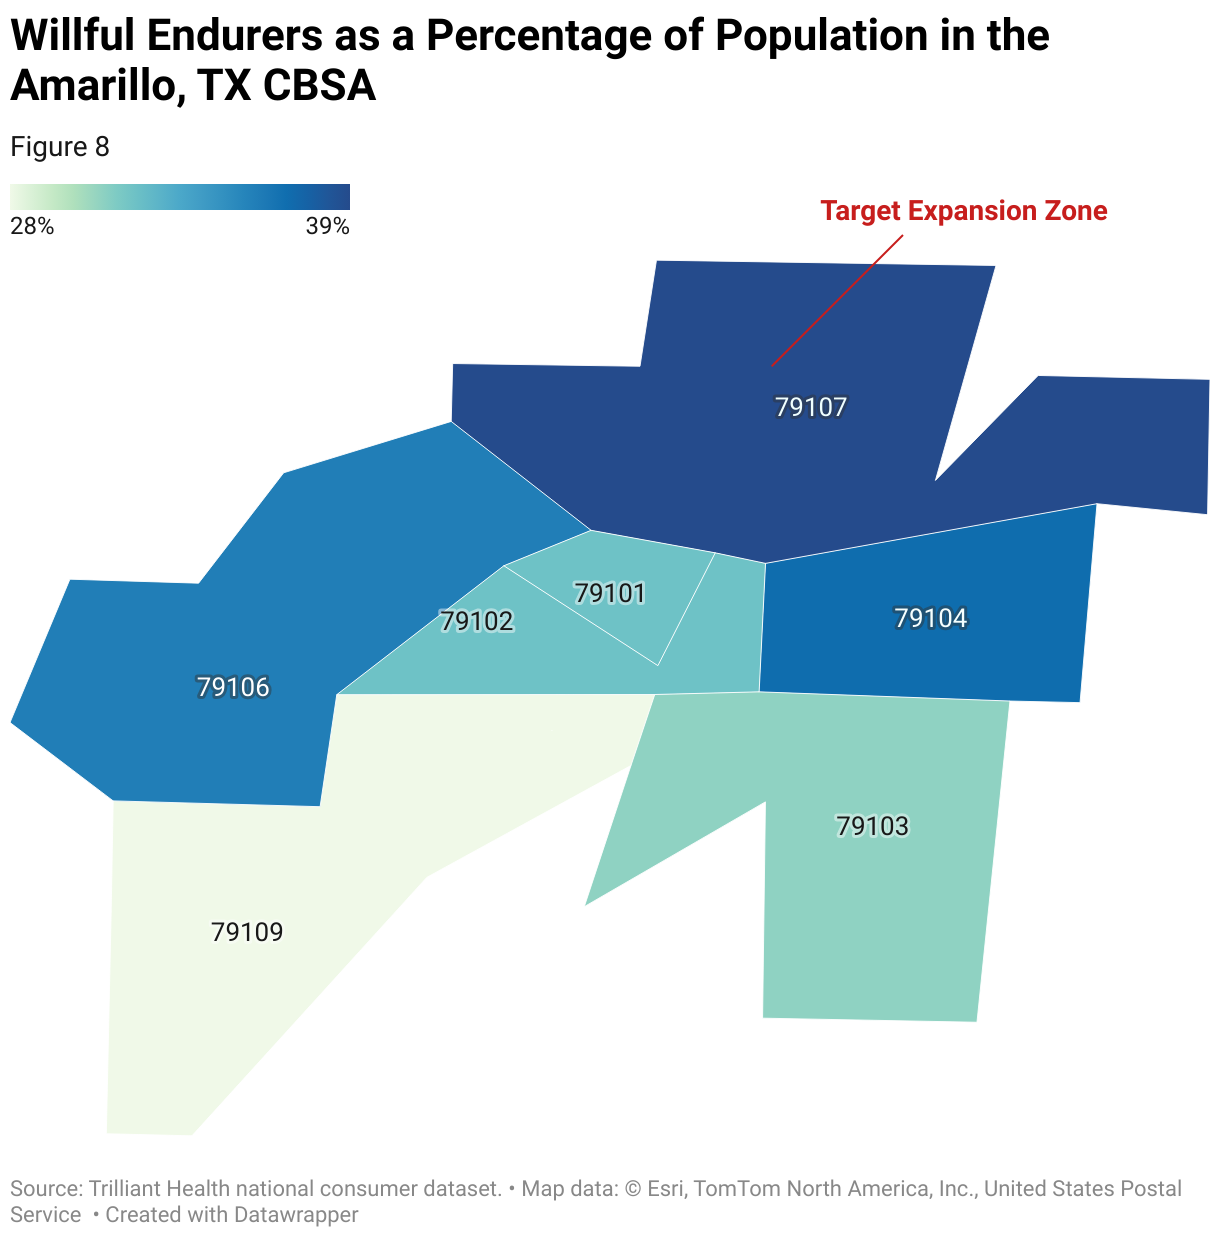 Map of the Willful Endurer population in the Amarillo, TX CBSA